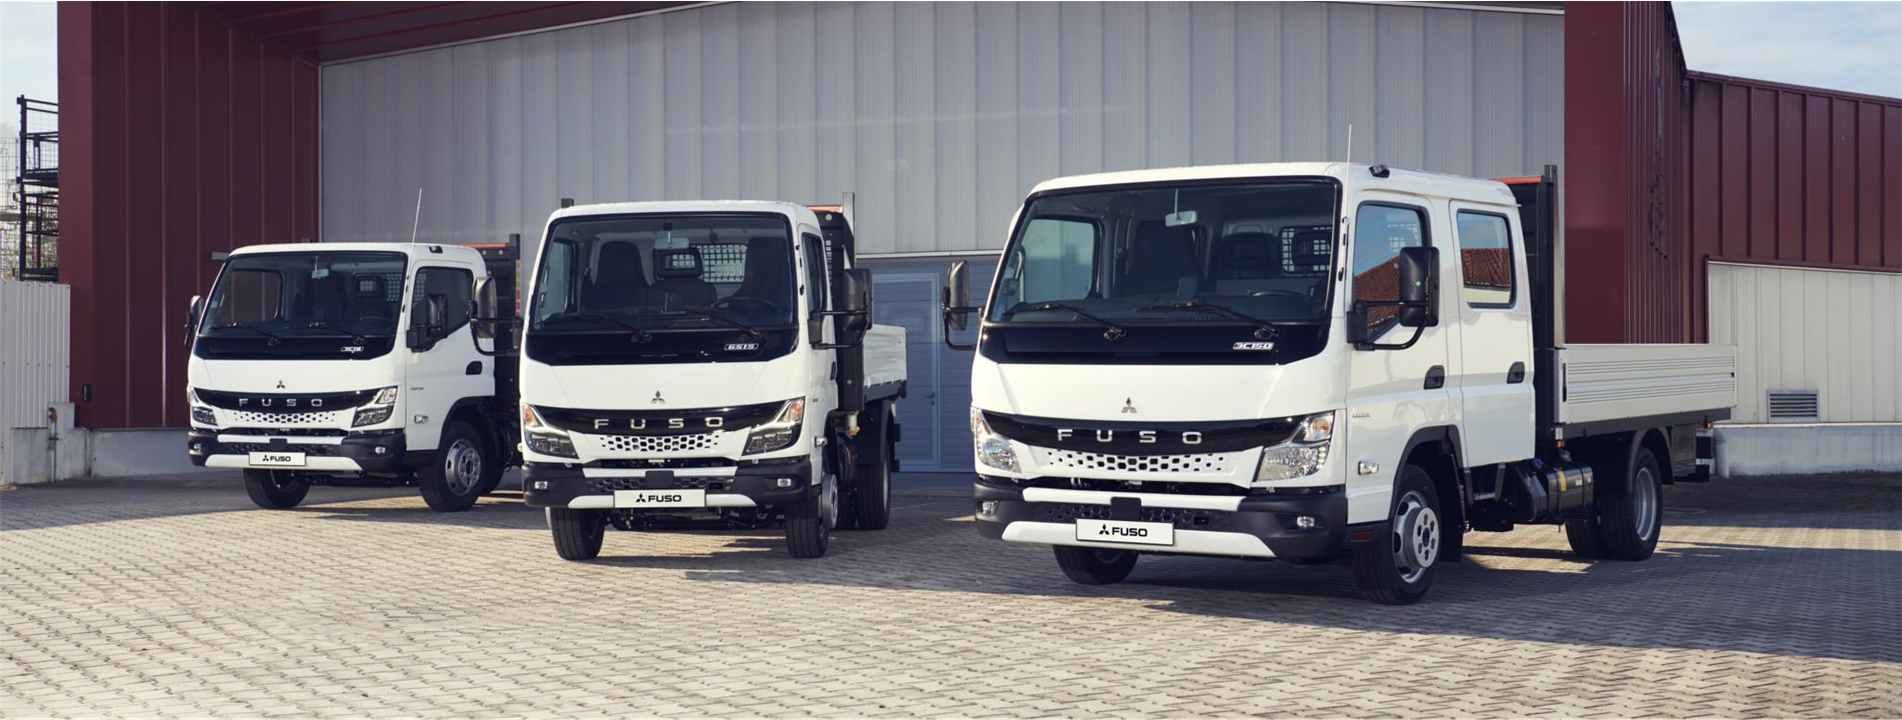 FUSO Offers